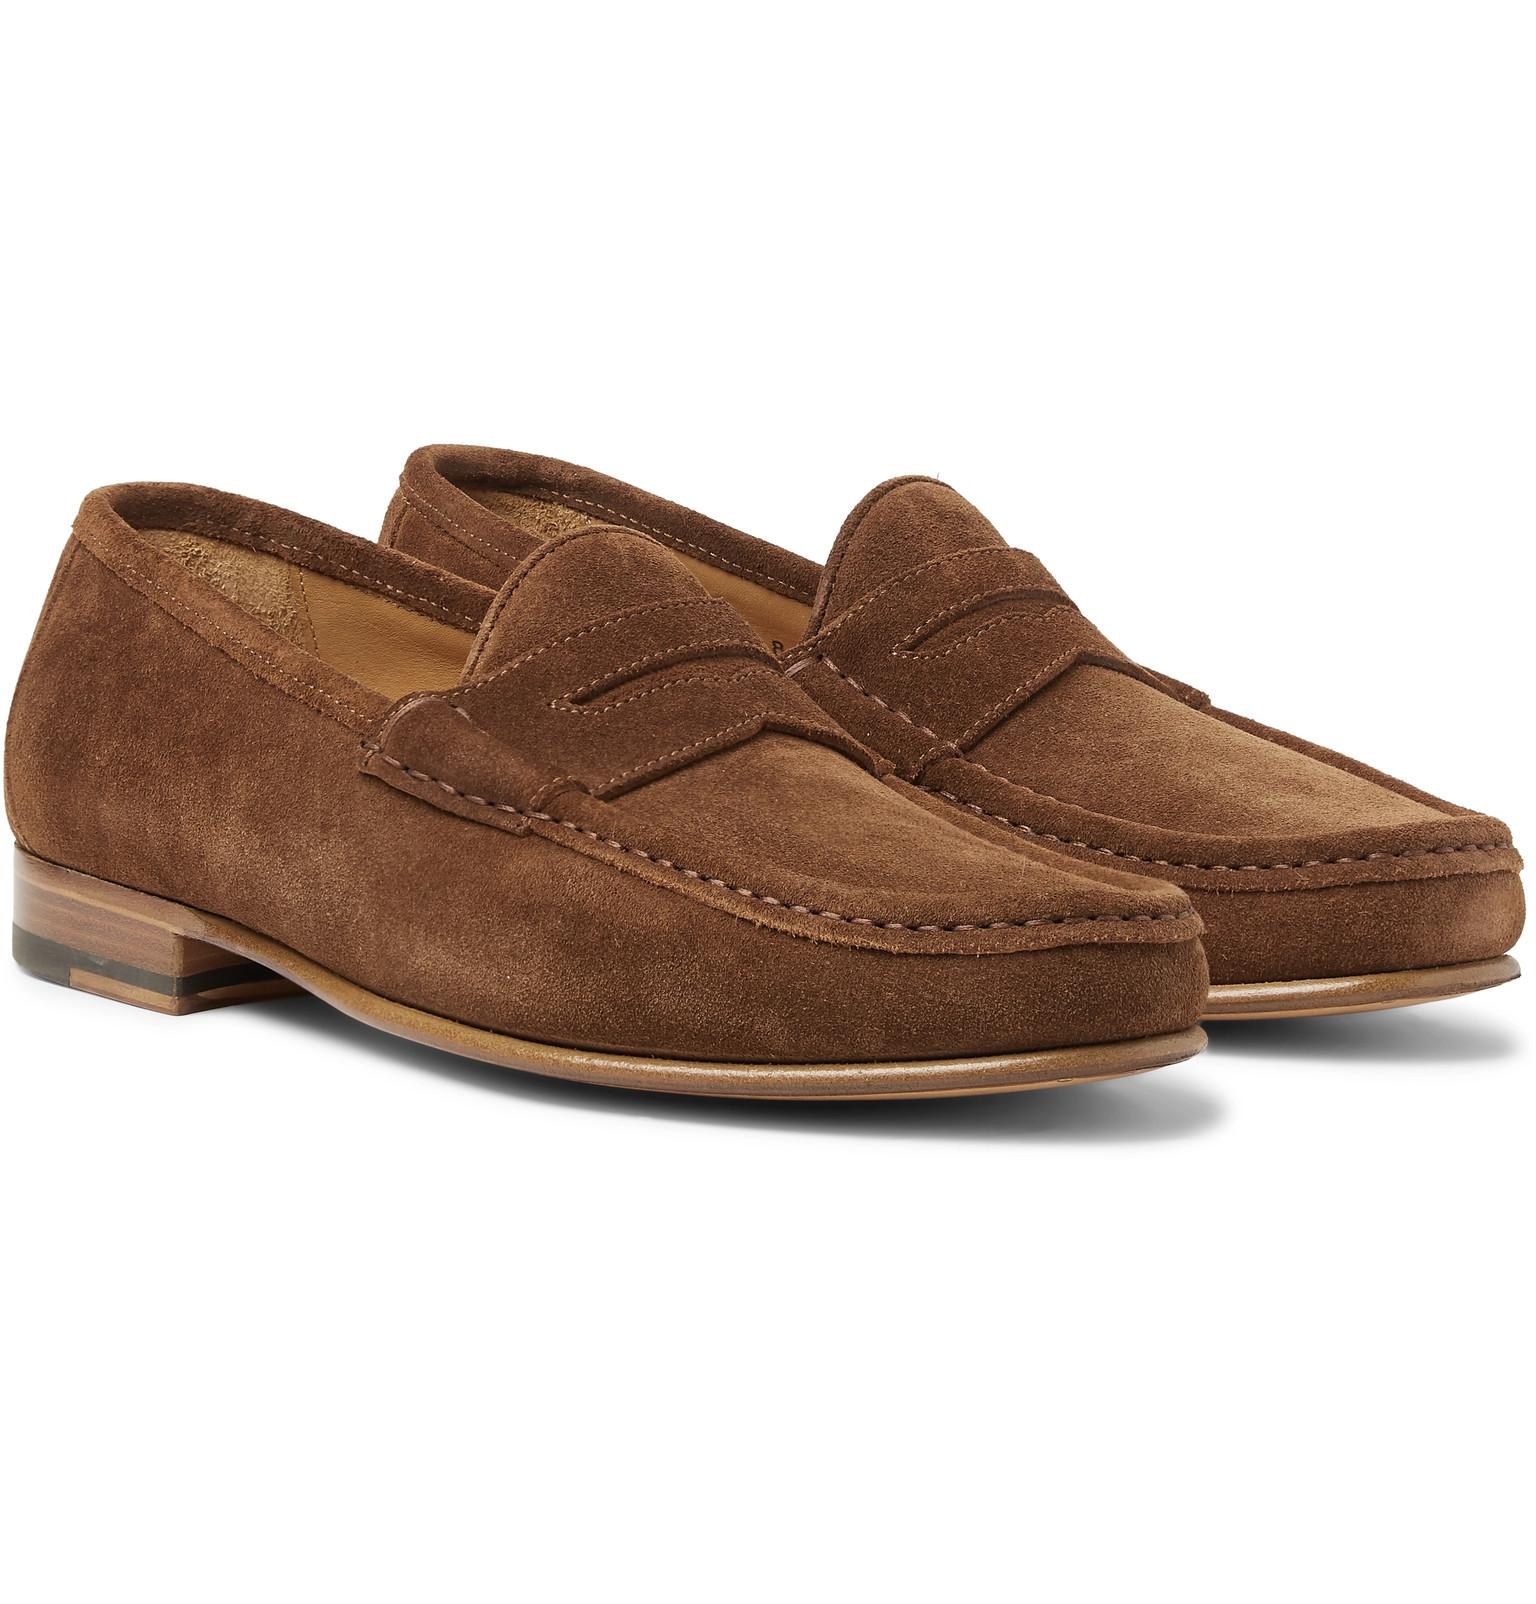 Yuketen Suede Penny Loafers in Brown for Men - Lyst